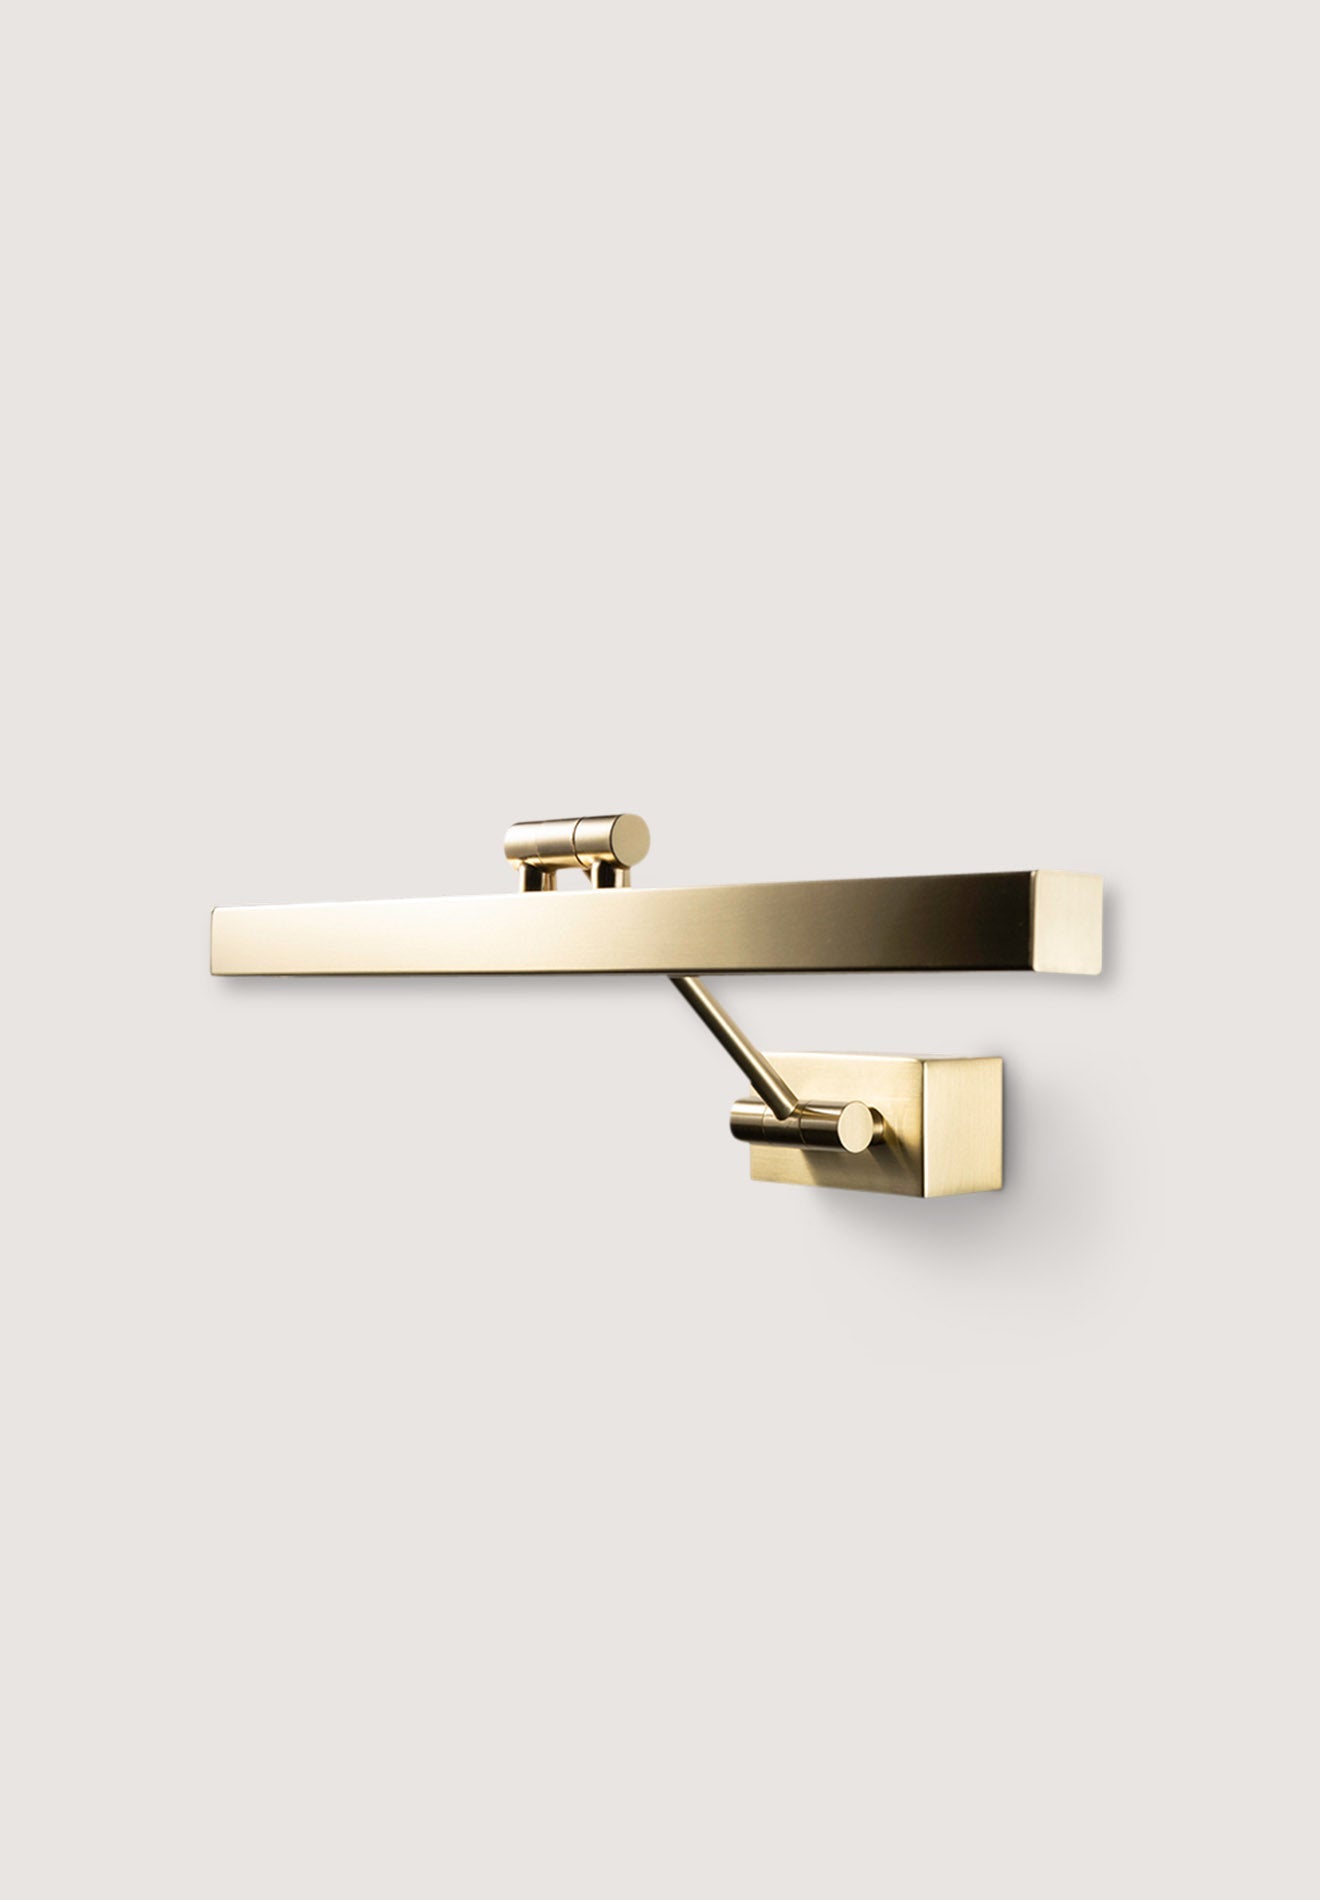 Shown in Brushed Brass